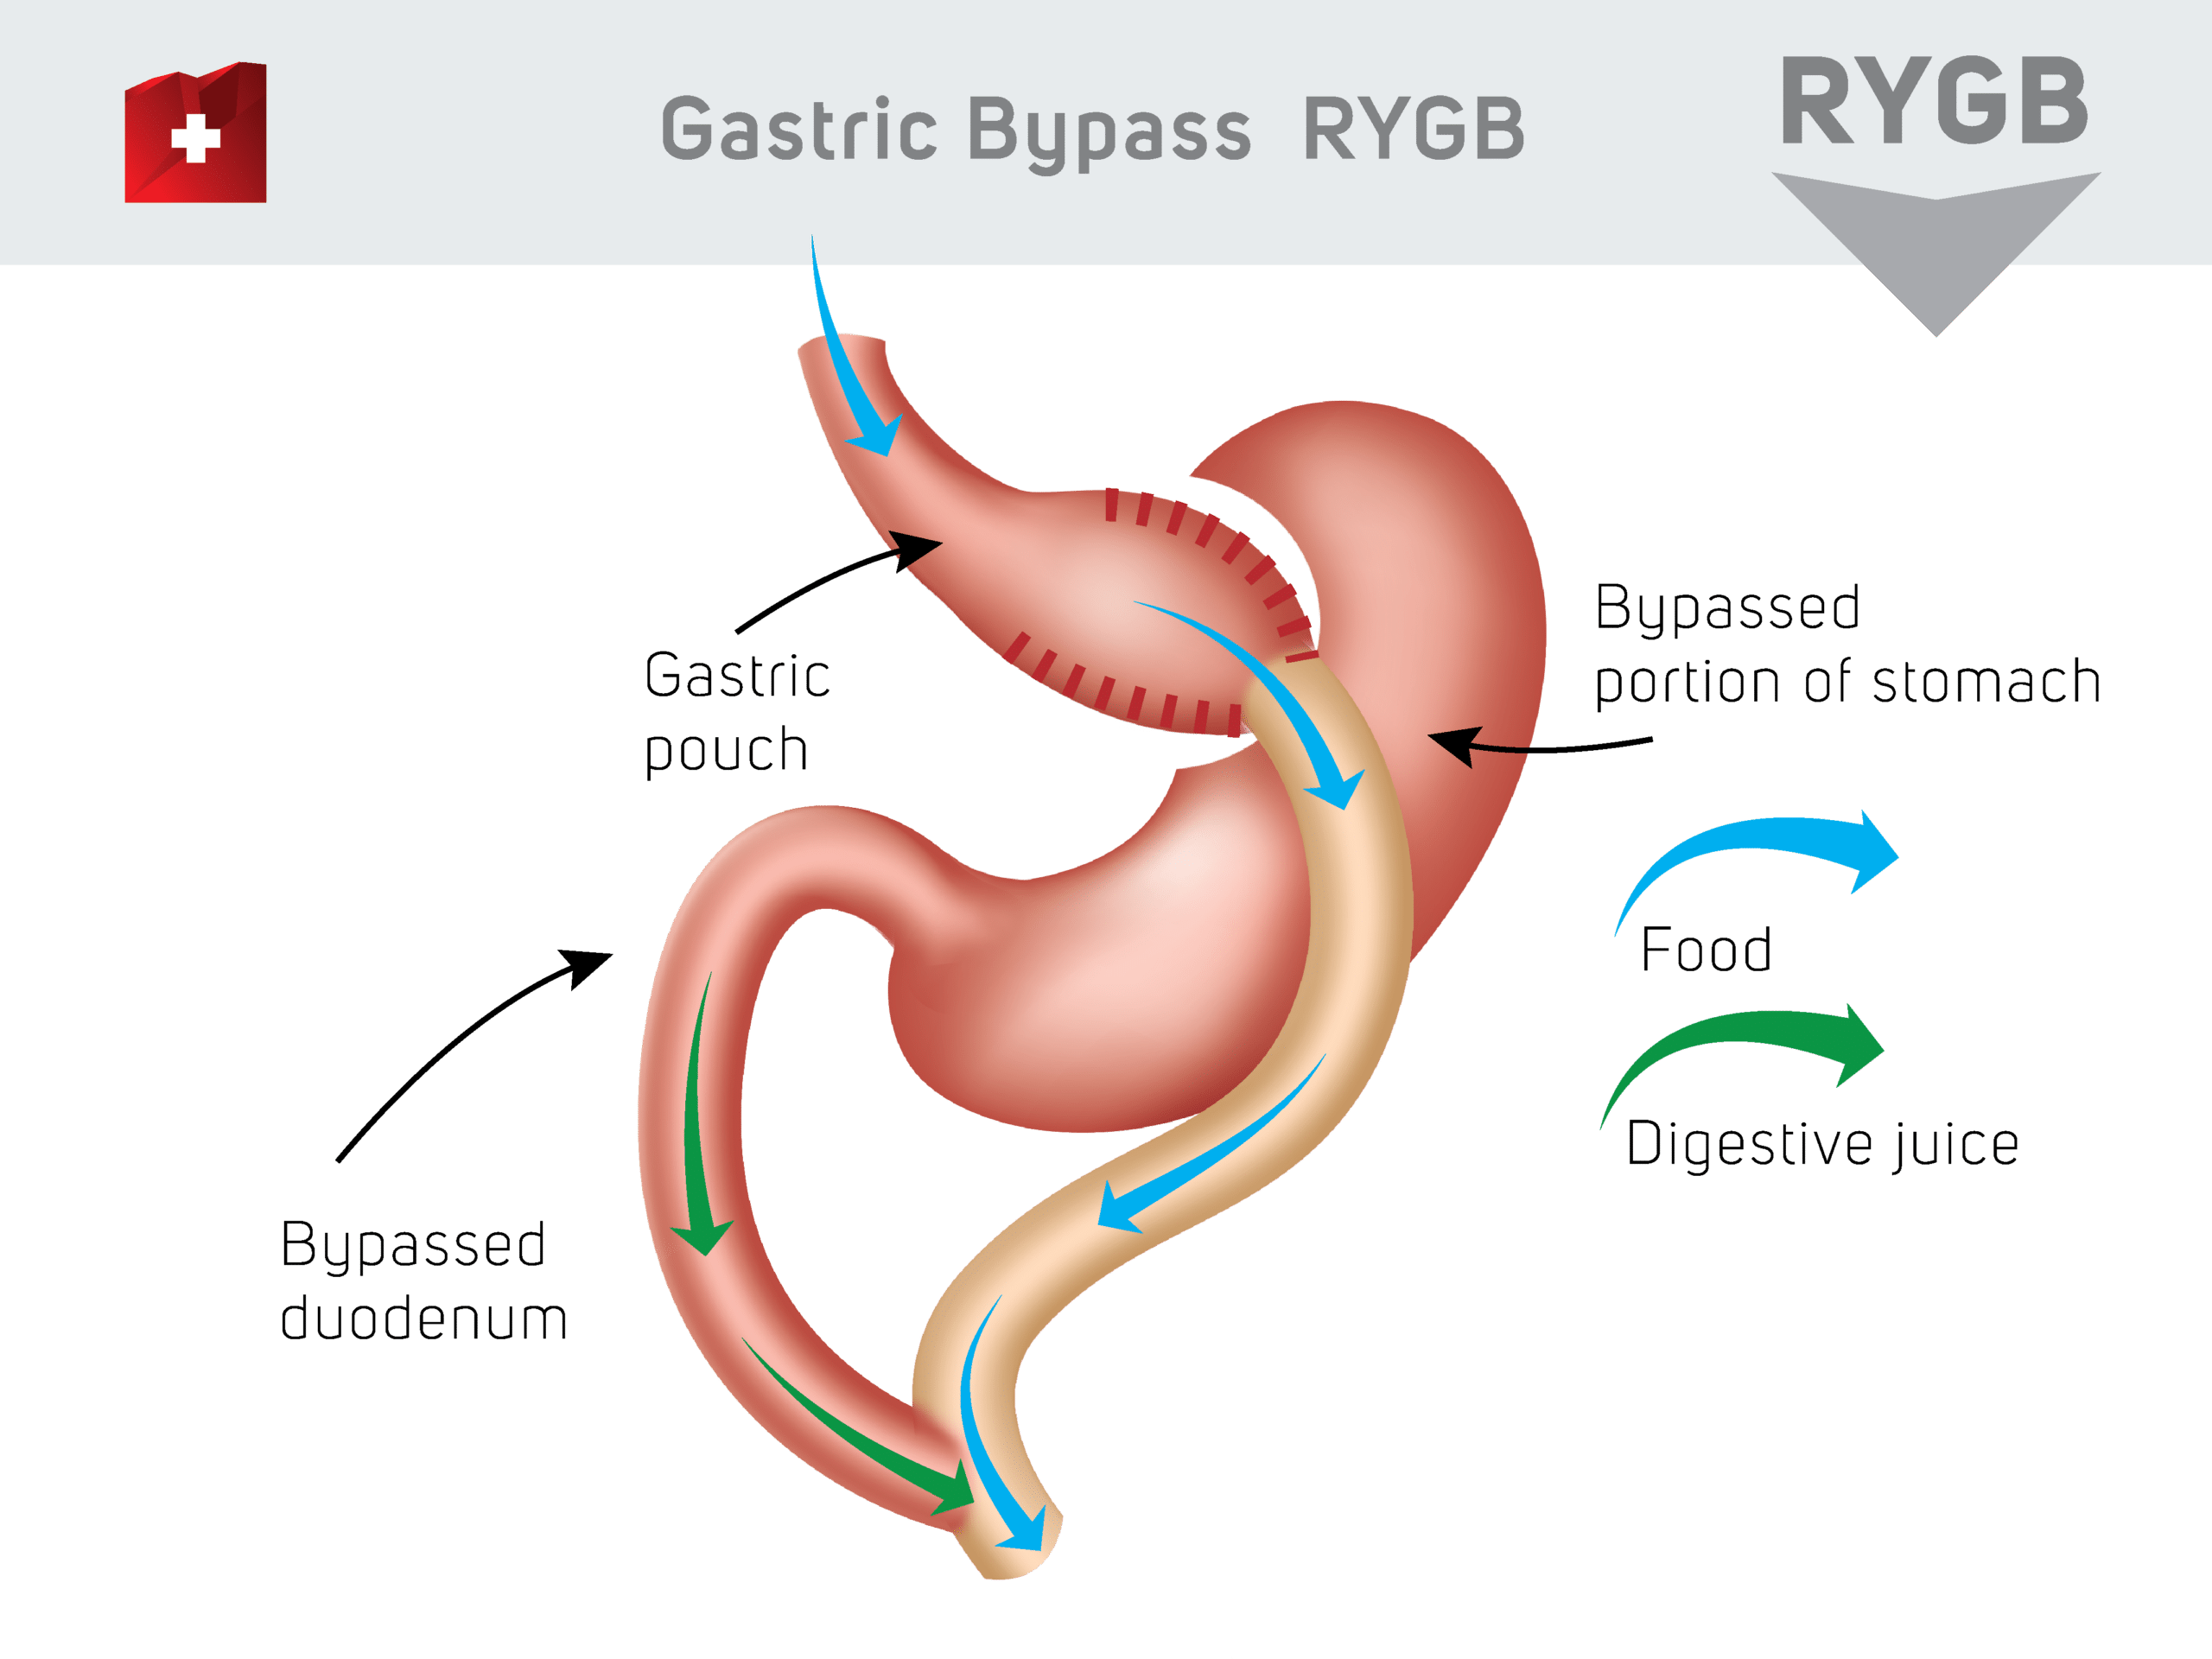 Gastric Bypass RYGB - gastric pouch / baypassed portin of stomach / baypassed doudenum